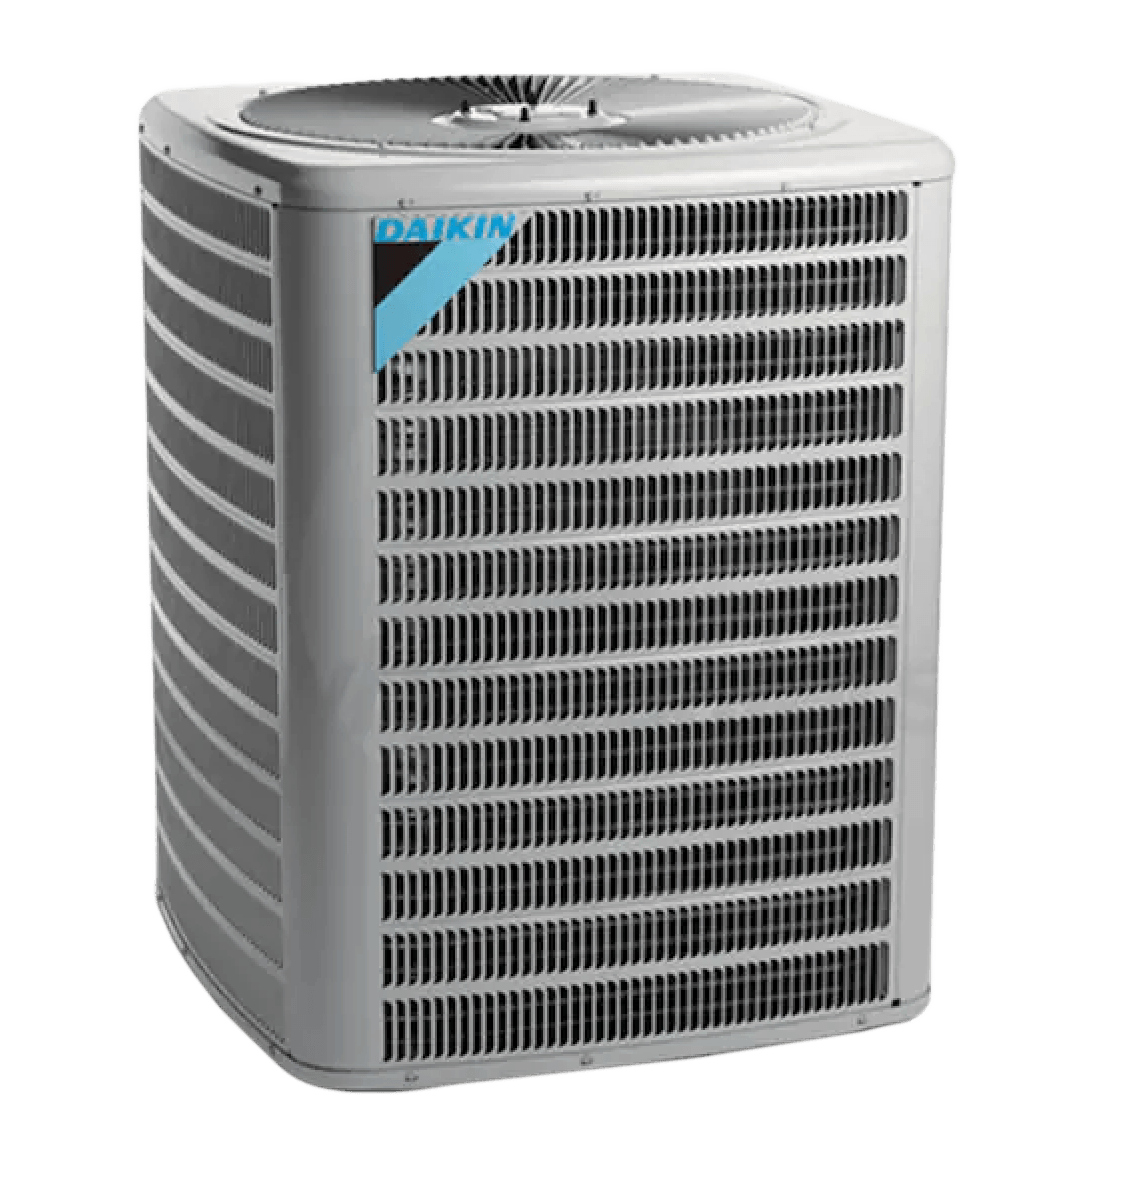 Air Conditioning Services in Raleigh, NC